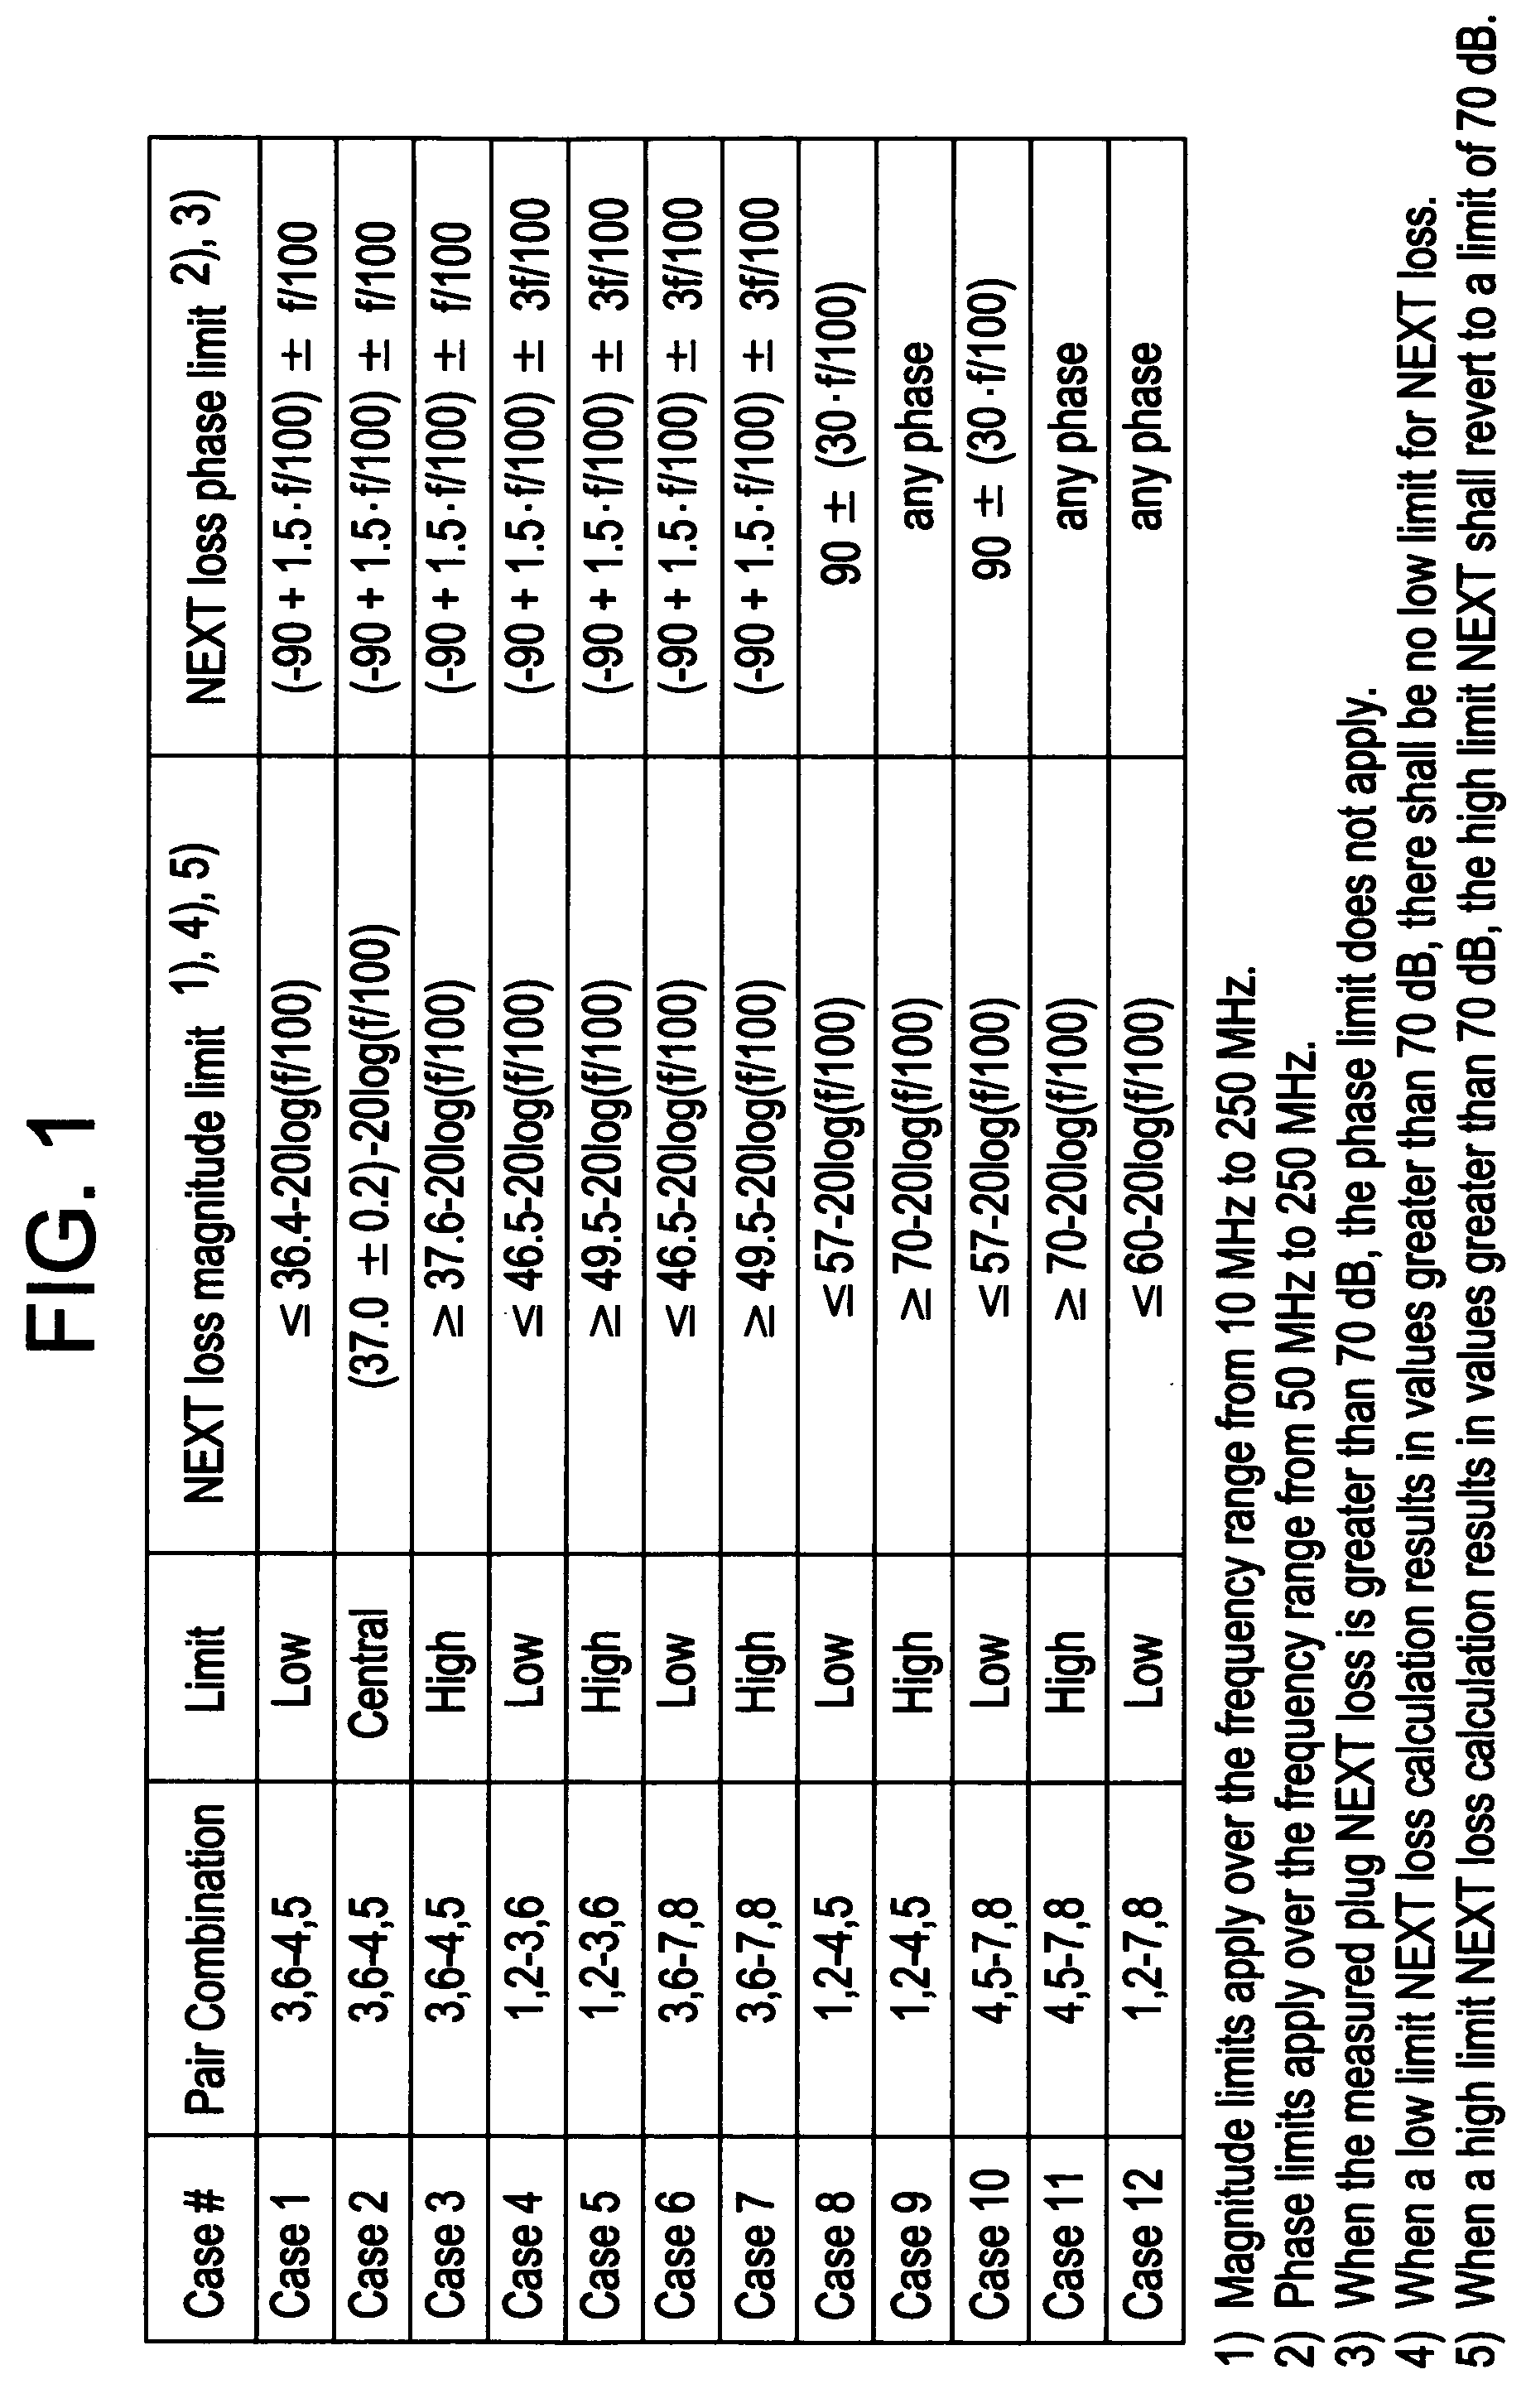 Apparatus for crosstalk compensation in a telecommunications connector